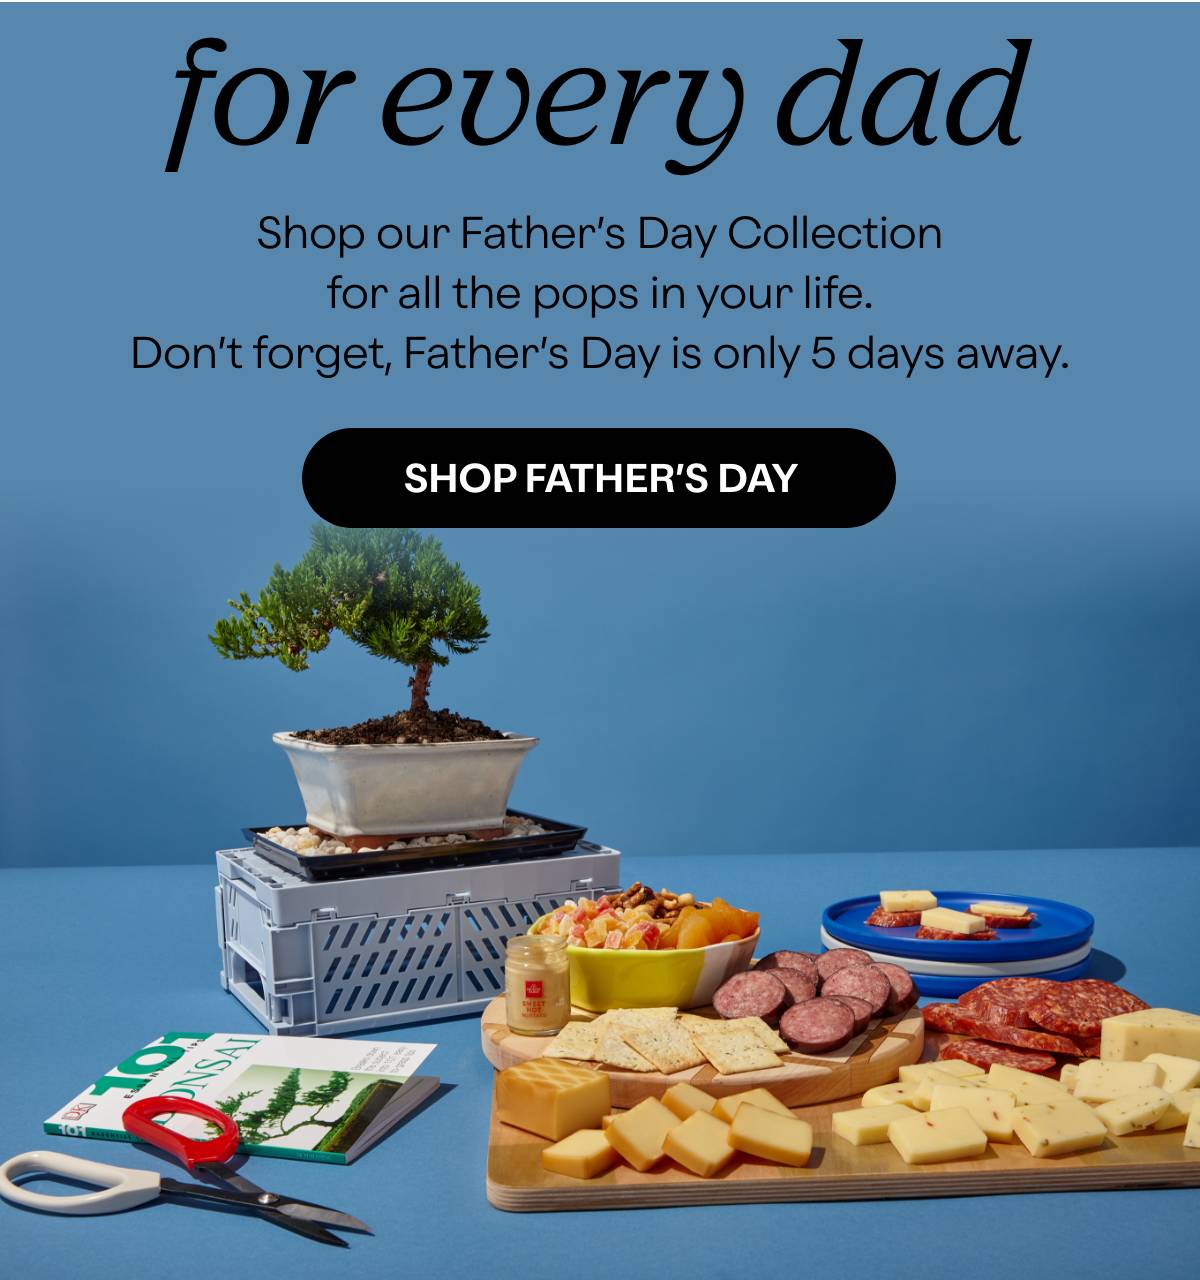 for every dad - Shop our Father's Day Collection for all the pops in your life. Don't forget, Father's Day is only 5 days away. - SHOP FATHER'S DAY 